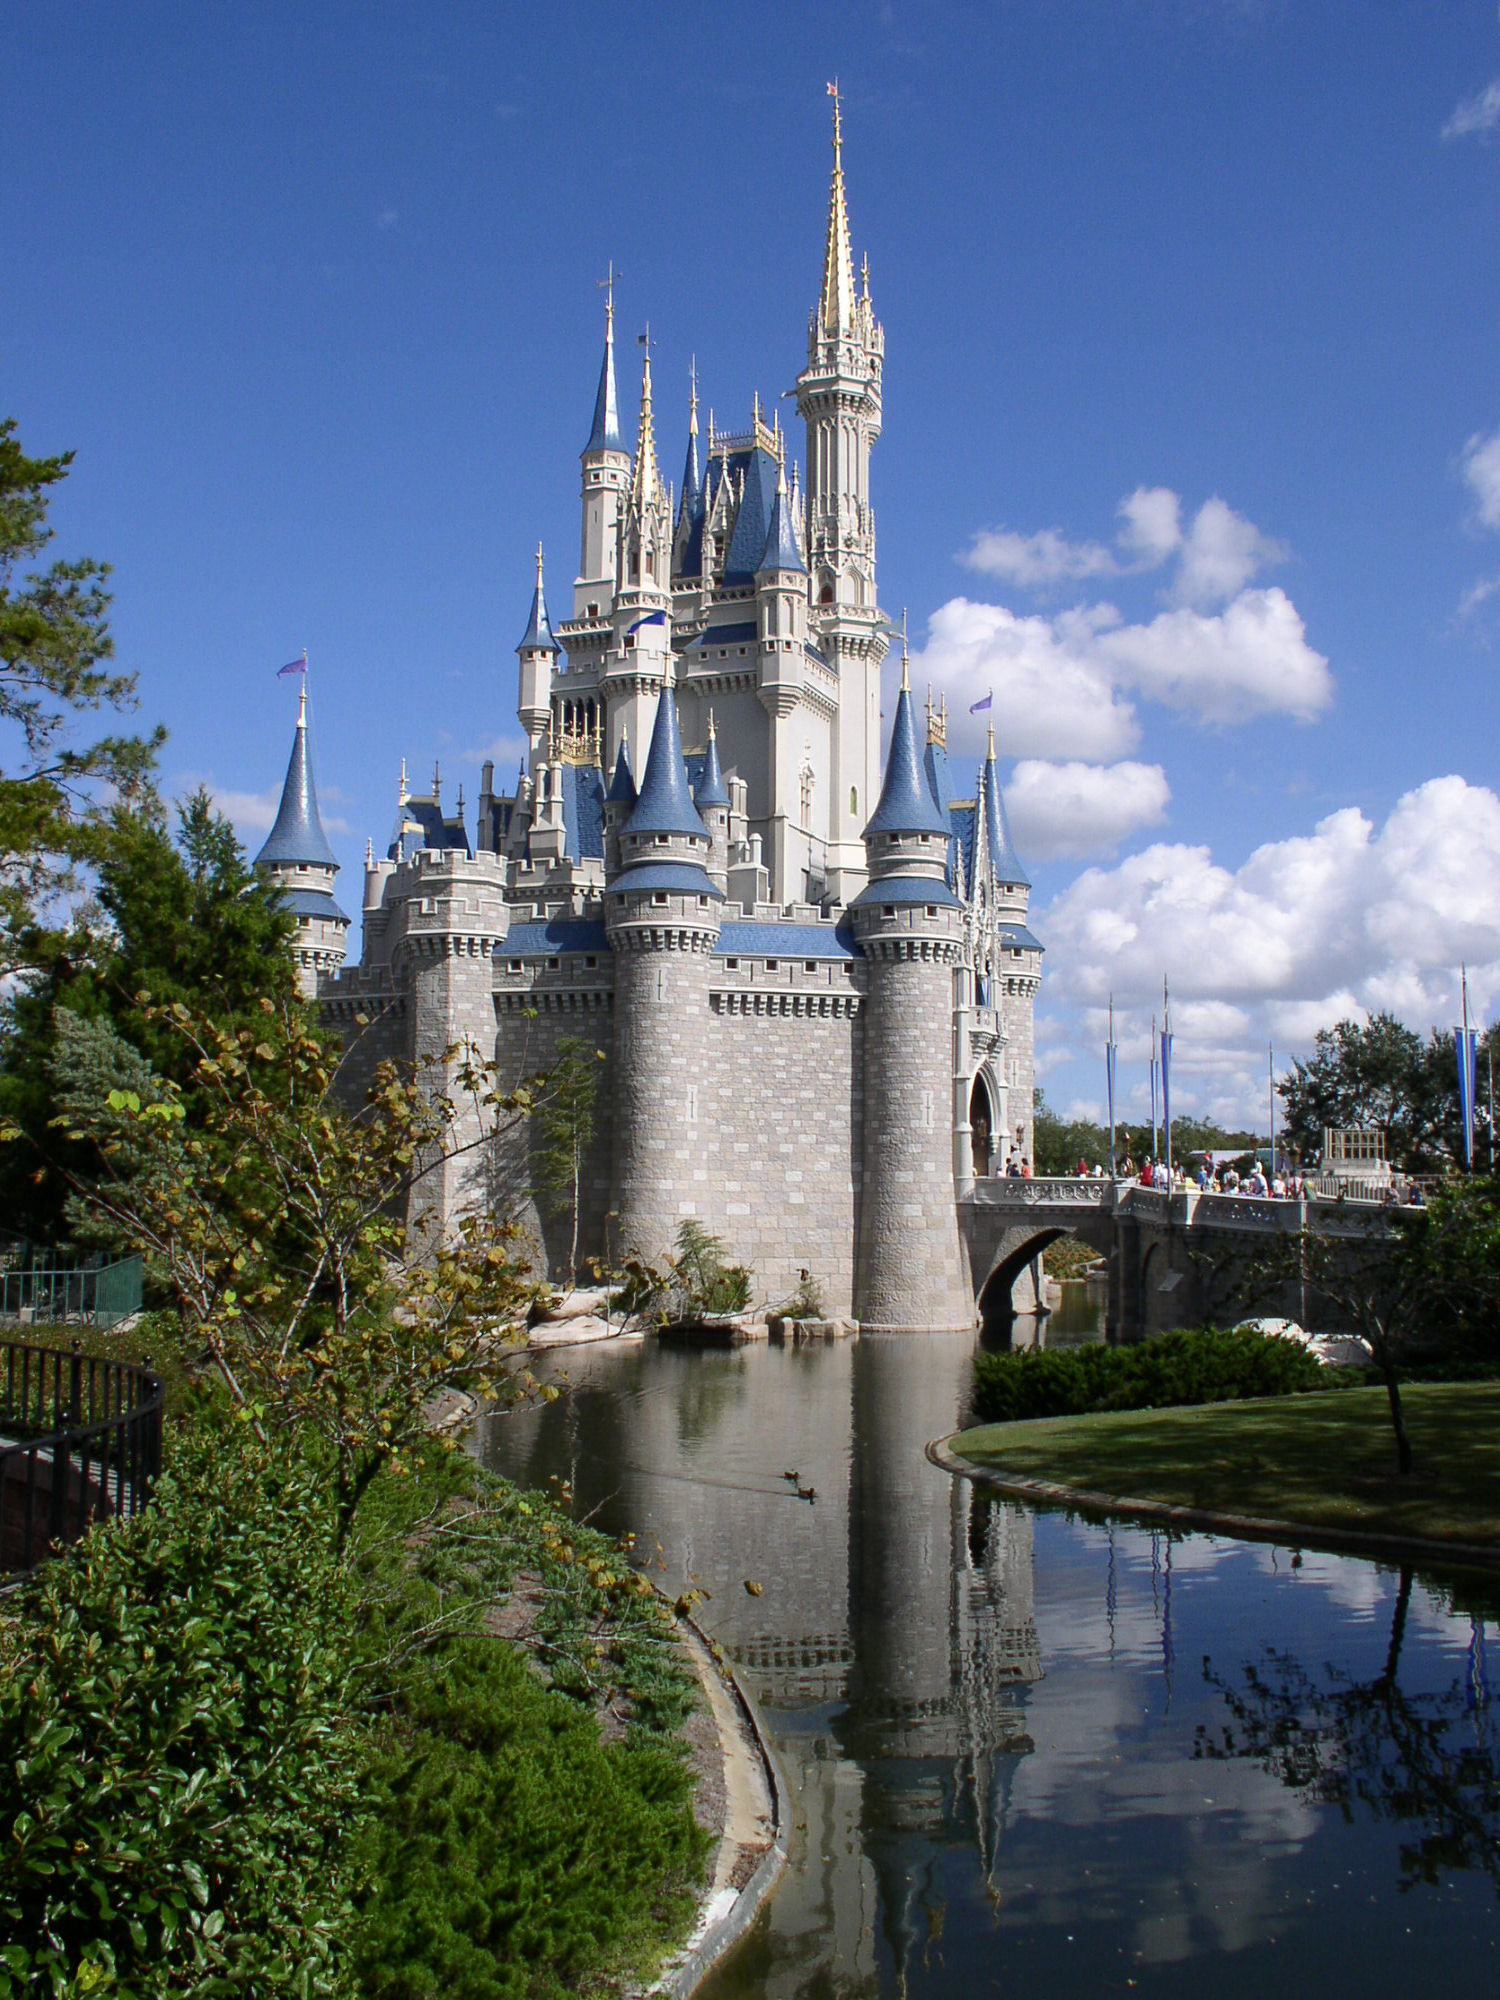 Cinderella's Castle and reflection